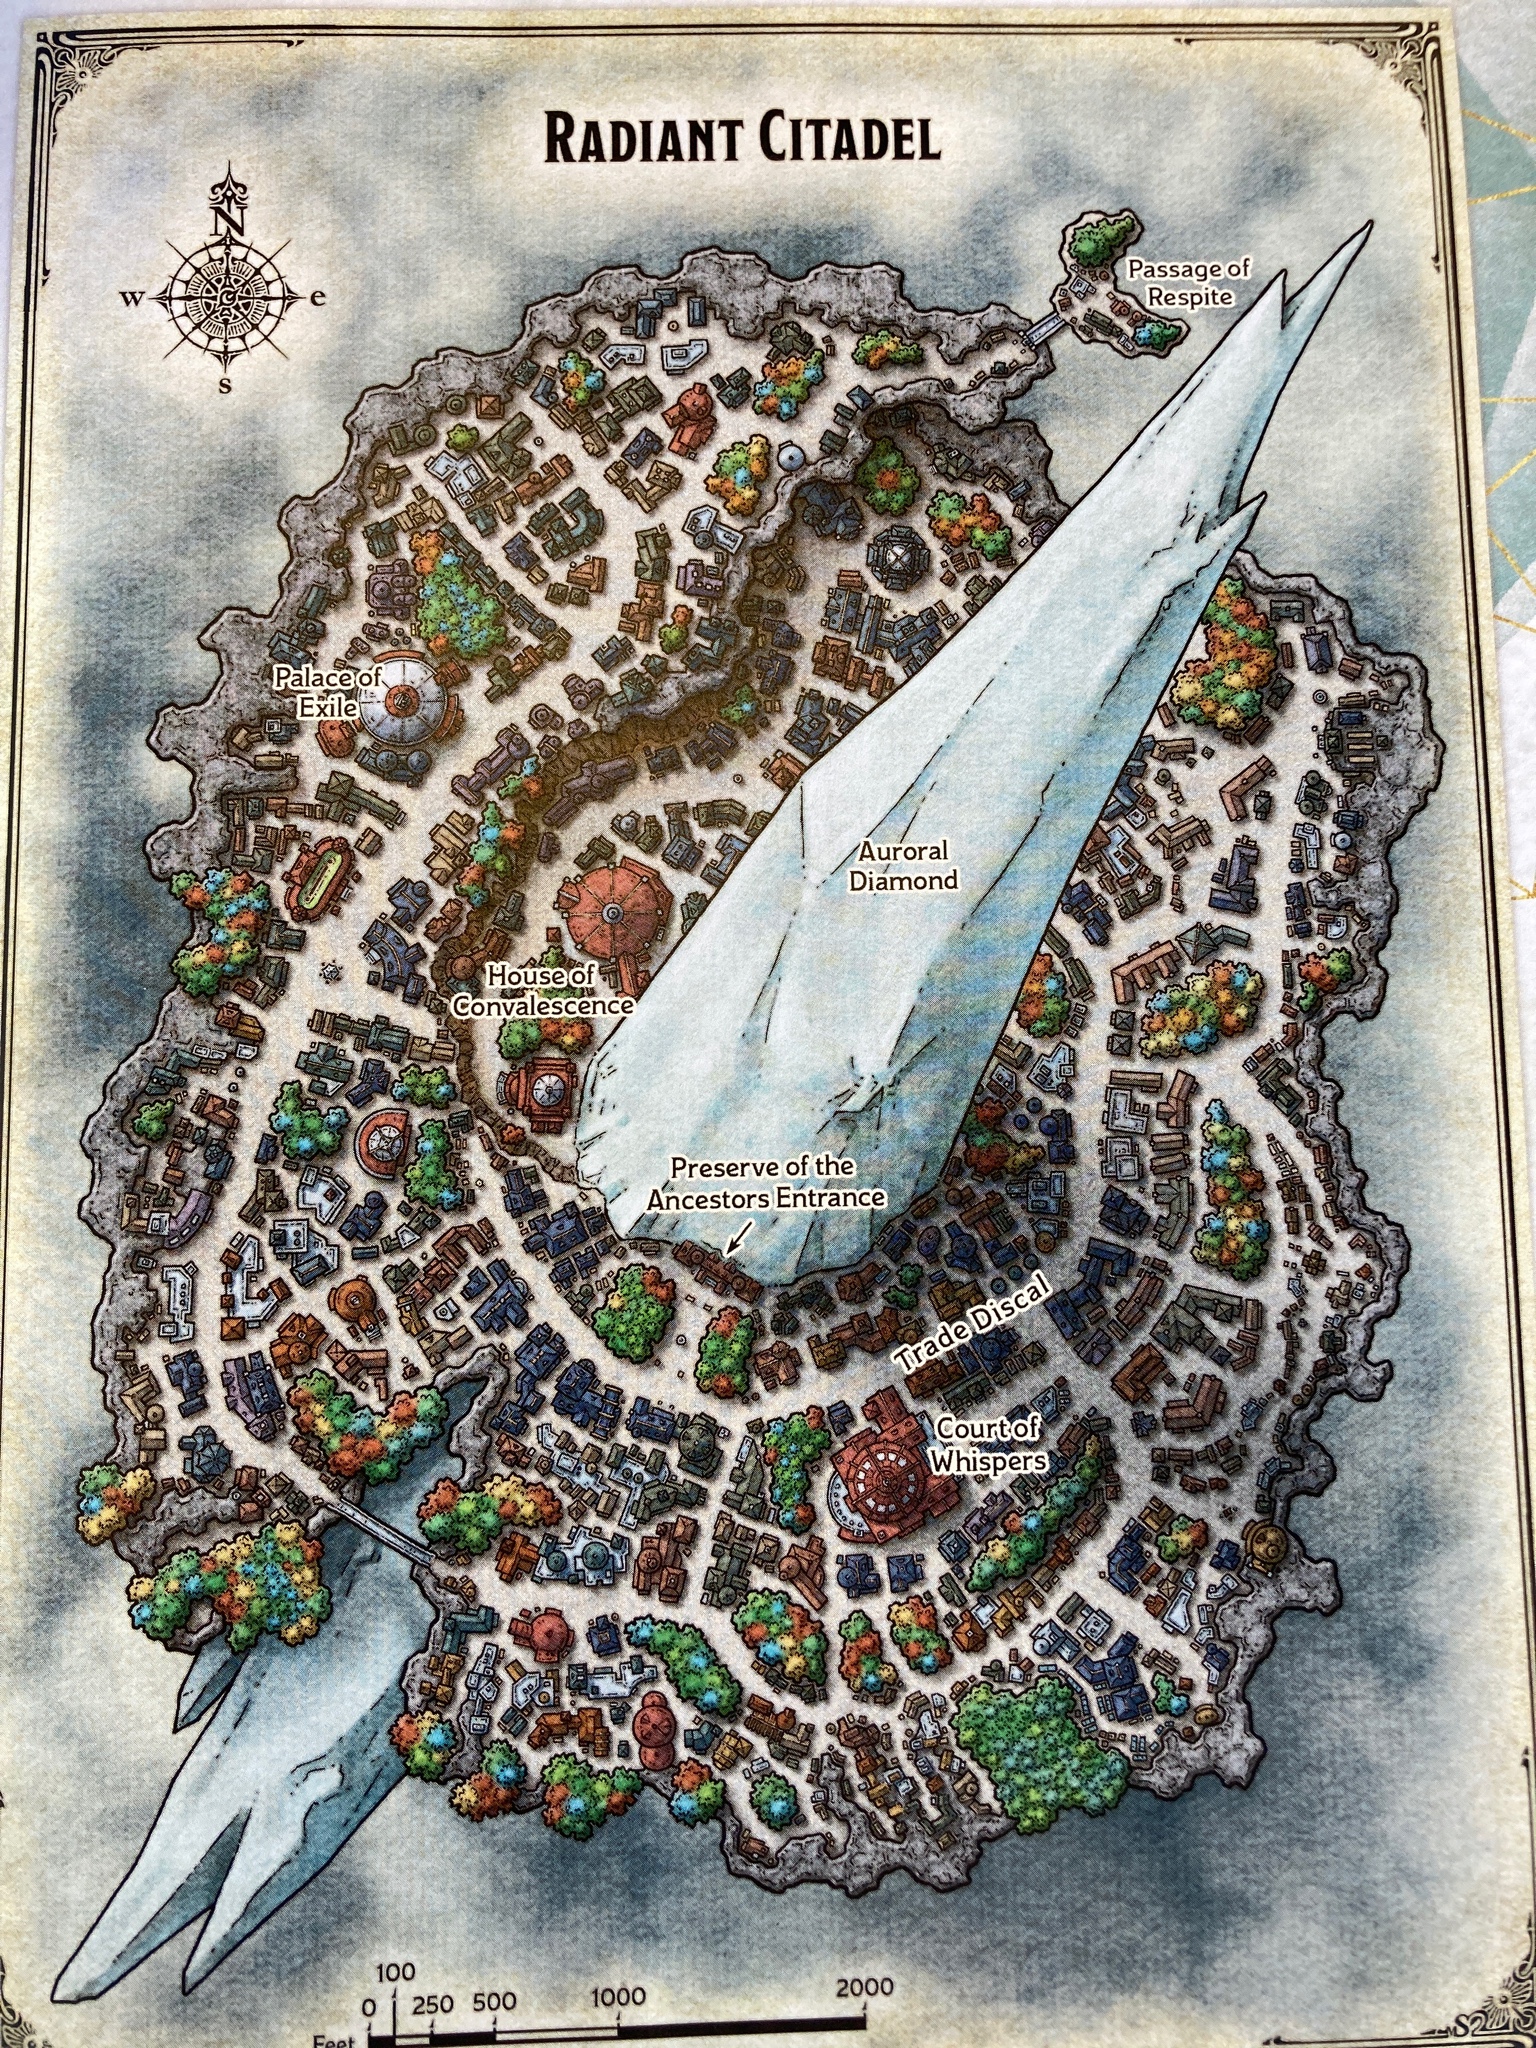  Map of the Radiant Citadel in full color